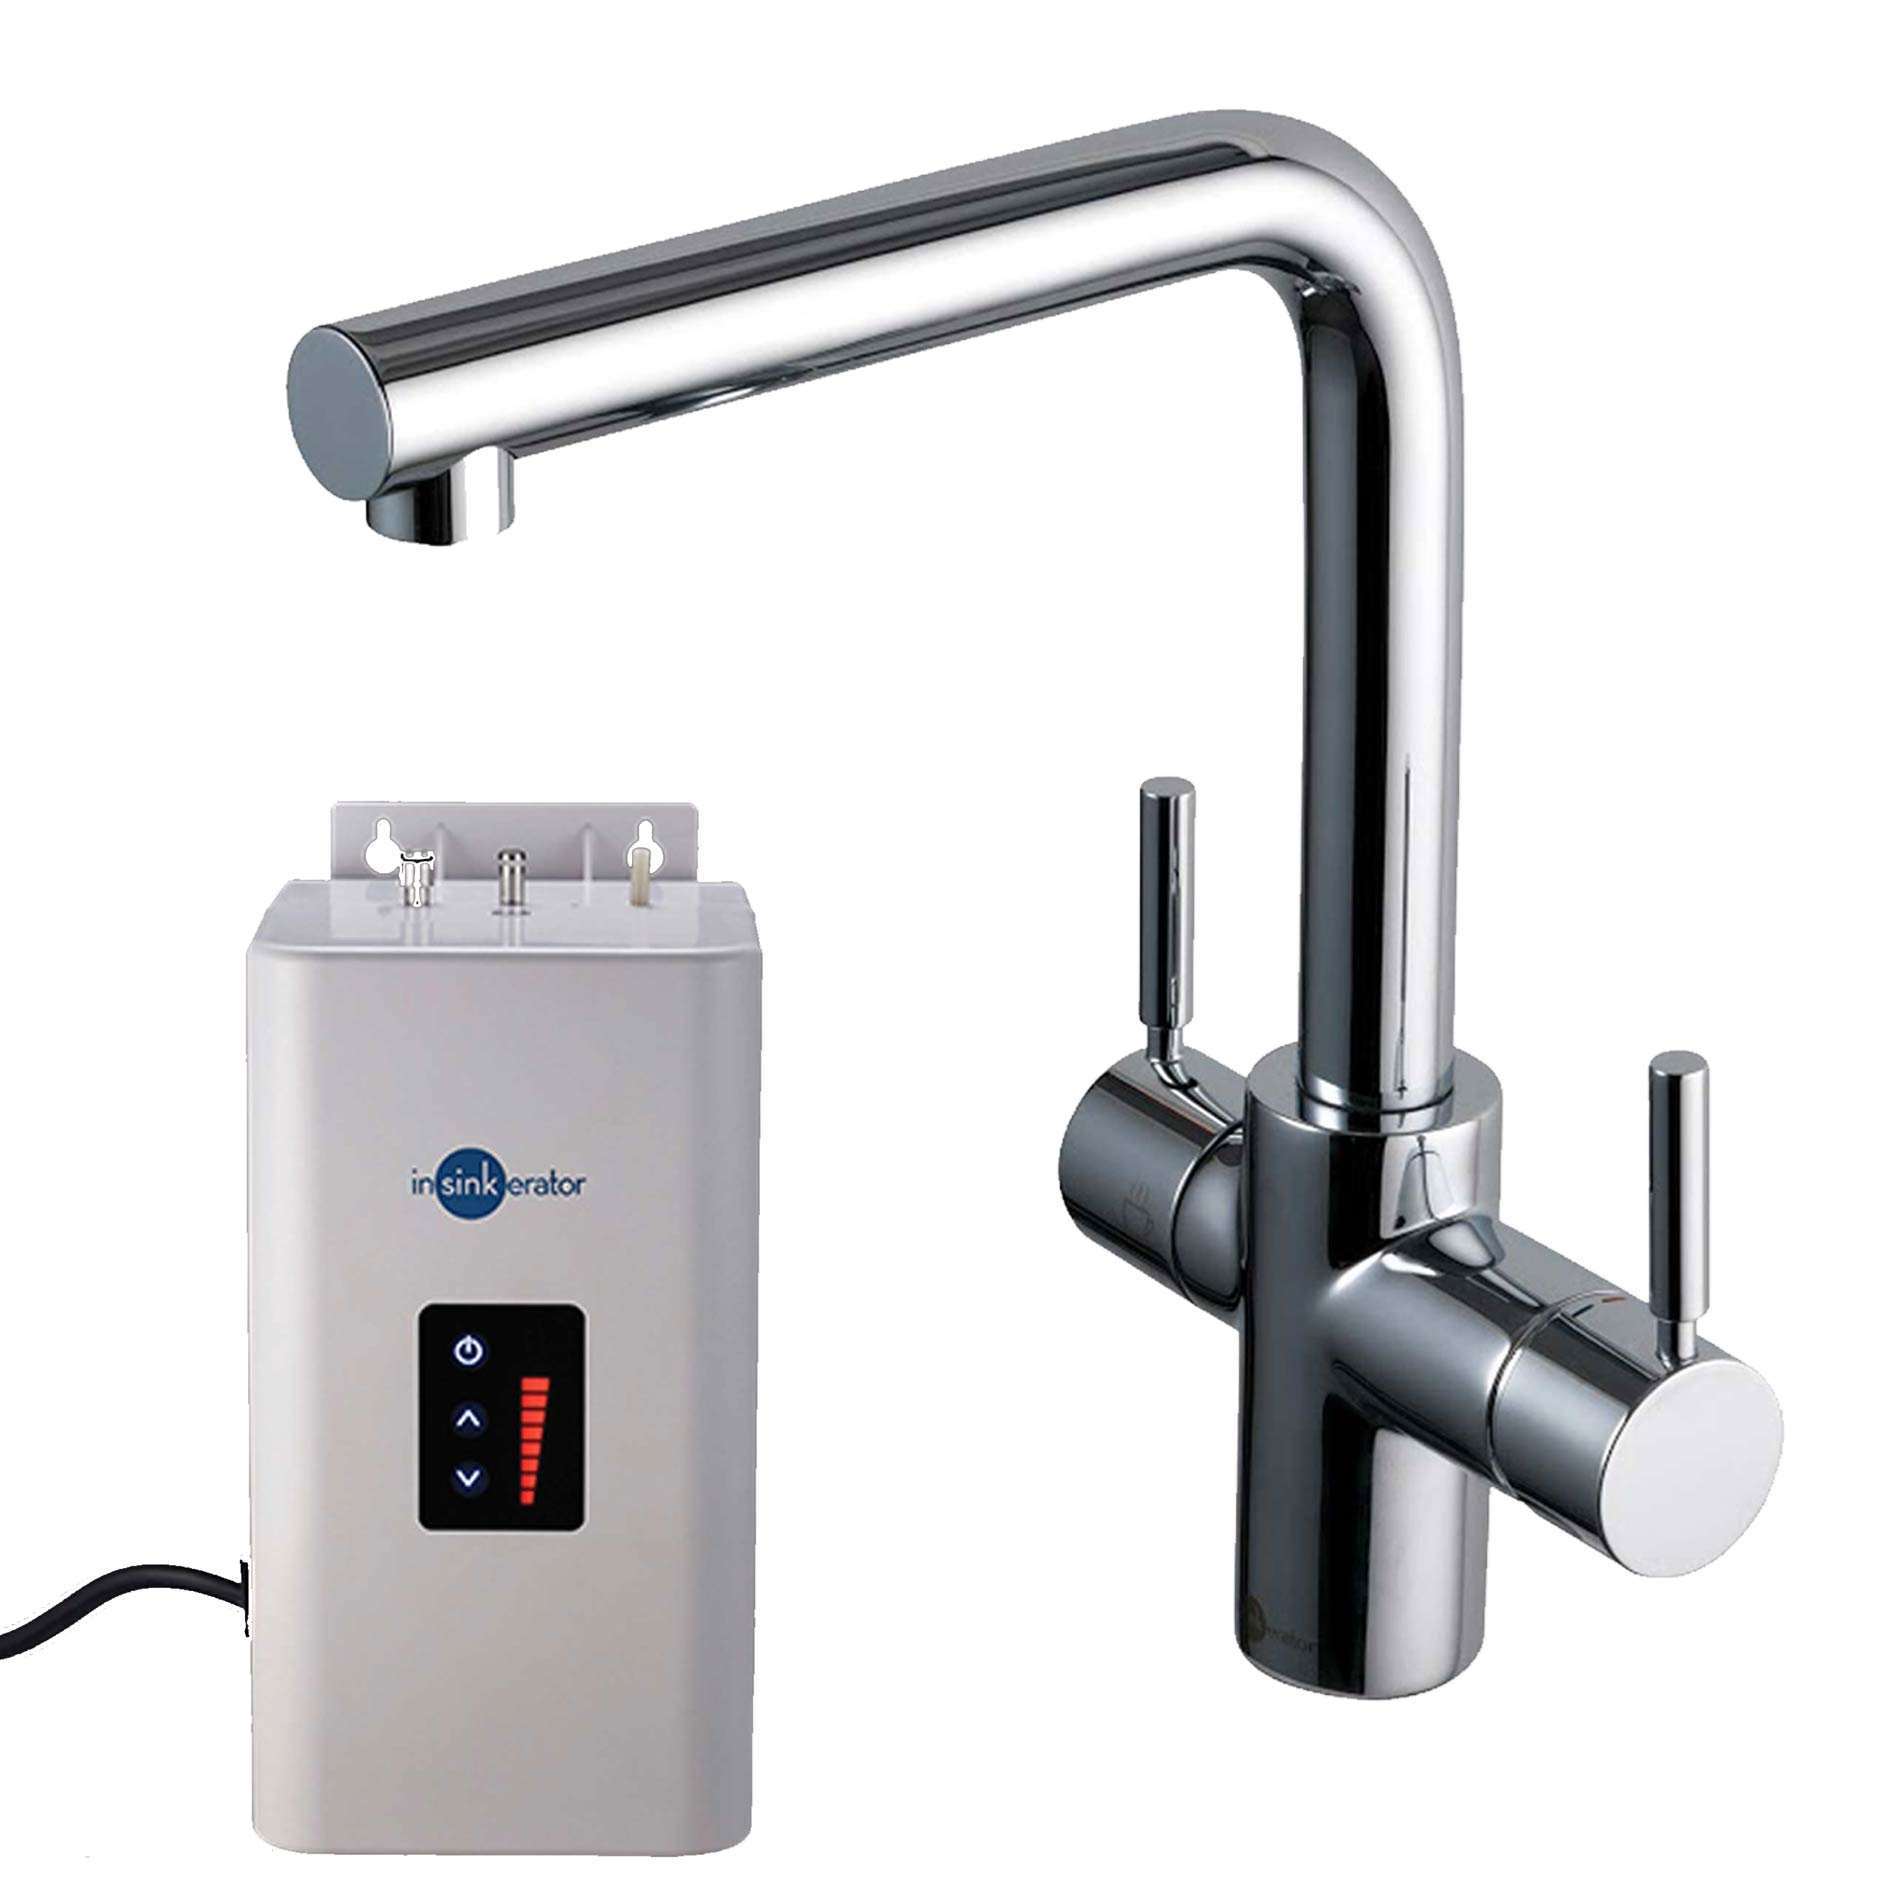 InSinkErator: 3N1 Chrome Steaming Hot Water Tap Pack - Kitchen Sinks ...